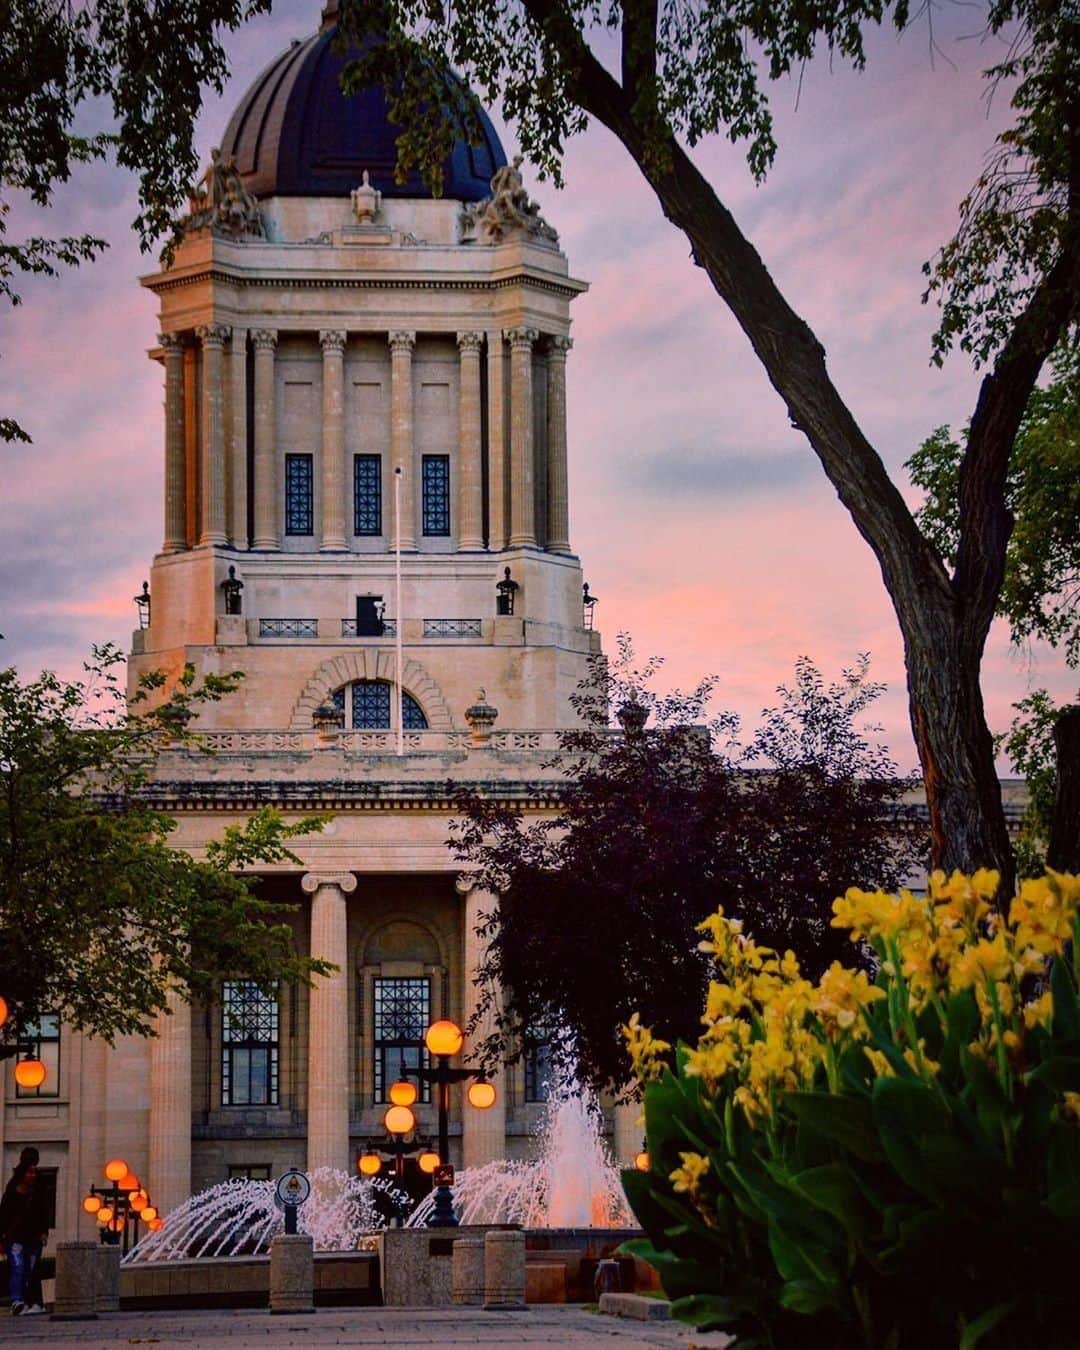 Explore Canadaさんのインスタグラム写真 - (Explore CanadaInstagram)「Today's #CanadaSpotlight is on @tourismwinnipeg!⁠⠀ ⁠⠀ Winnipeg is the capital of Manitoba, and sits at the junction of the Assinboine and Red Rivers. This is where the heart of the city gets its name from - The Forks! If you’re local to Winnipeg, here are some ways you can explore your city this summer:⁠⠀ ⁠⠀ ❤️ Hike or cycle through aspen forests at FortWhyte Alive (@fortwhytealive) - keep an eye out for wildlife, including over 160 species of birds and North America’s largest urban bison herd.⁠⠀ 💚 Explore gallery exhibits, including the world’s largest collection of contemporary Inuit Art at the Winnipeg Art Gallery (@wag_ca).⁠⠀ 💛 Take in the colours and cultures of the city with a self-guided mural tour.⁠⠀ 🧡 Embark on a culinary adventure and tour some of the city’s 50+ delicious food trucks.⁠⠀ 💜 Sit back and relax at Thermëa by Nordik Spa-Nature (@thermeawinnipeg), Winnipeg’s Scandinavian outdoor spa.⁠⠀ ⁠⠀ Head on over to @tourismwinnipeg's profile for more things to do in Winnipeg, amazing photos, local updates and more!⁠⠀ ⁠⠀ #ExploreCanadaFromHome #ForGlowingHearts⁠⠀ ⁠⠀ 📷: ⁠⠀ ⁠⠀ 1. @jeff_vernaus⁠⠀ 2&3. @peggrammer⁠⠀ 4. @anthony_urso⁠⠀ 5. @gyk26⁠⠀ 6. @vince.constantine⁠⠀ 7. @didurdesigns⁠⠀ 8. @tourismwinnipeg  Nordik Group⁠⠀ ⁠⠀ 📍: @tourismwinnipeg⁠⠀ ⁠⠀ #OnlyInThePeg⁠⠀」7月25日 1時26分 - explorecanada